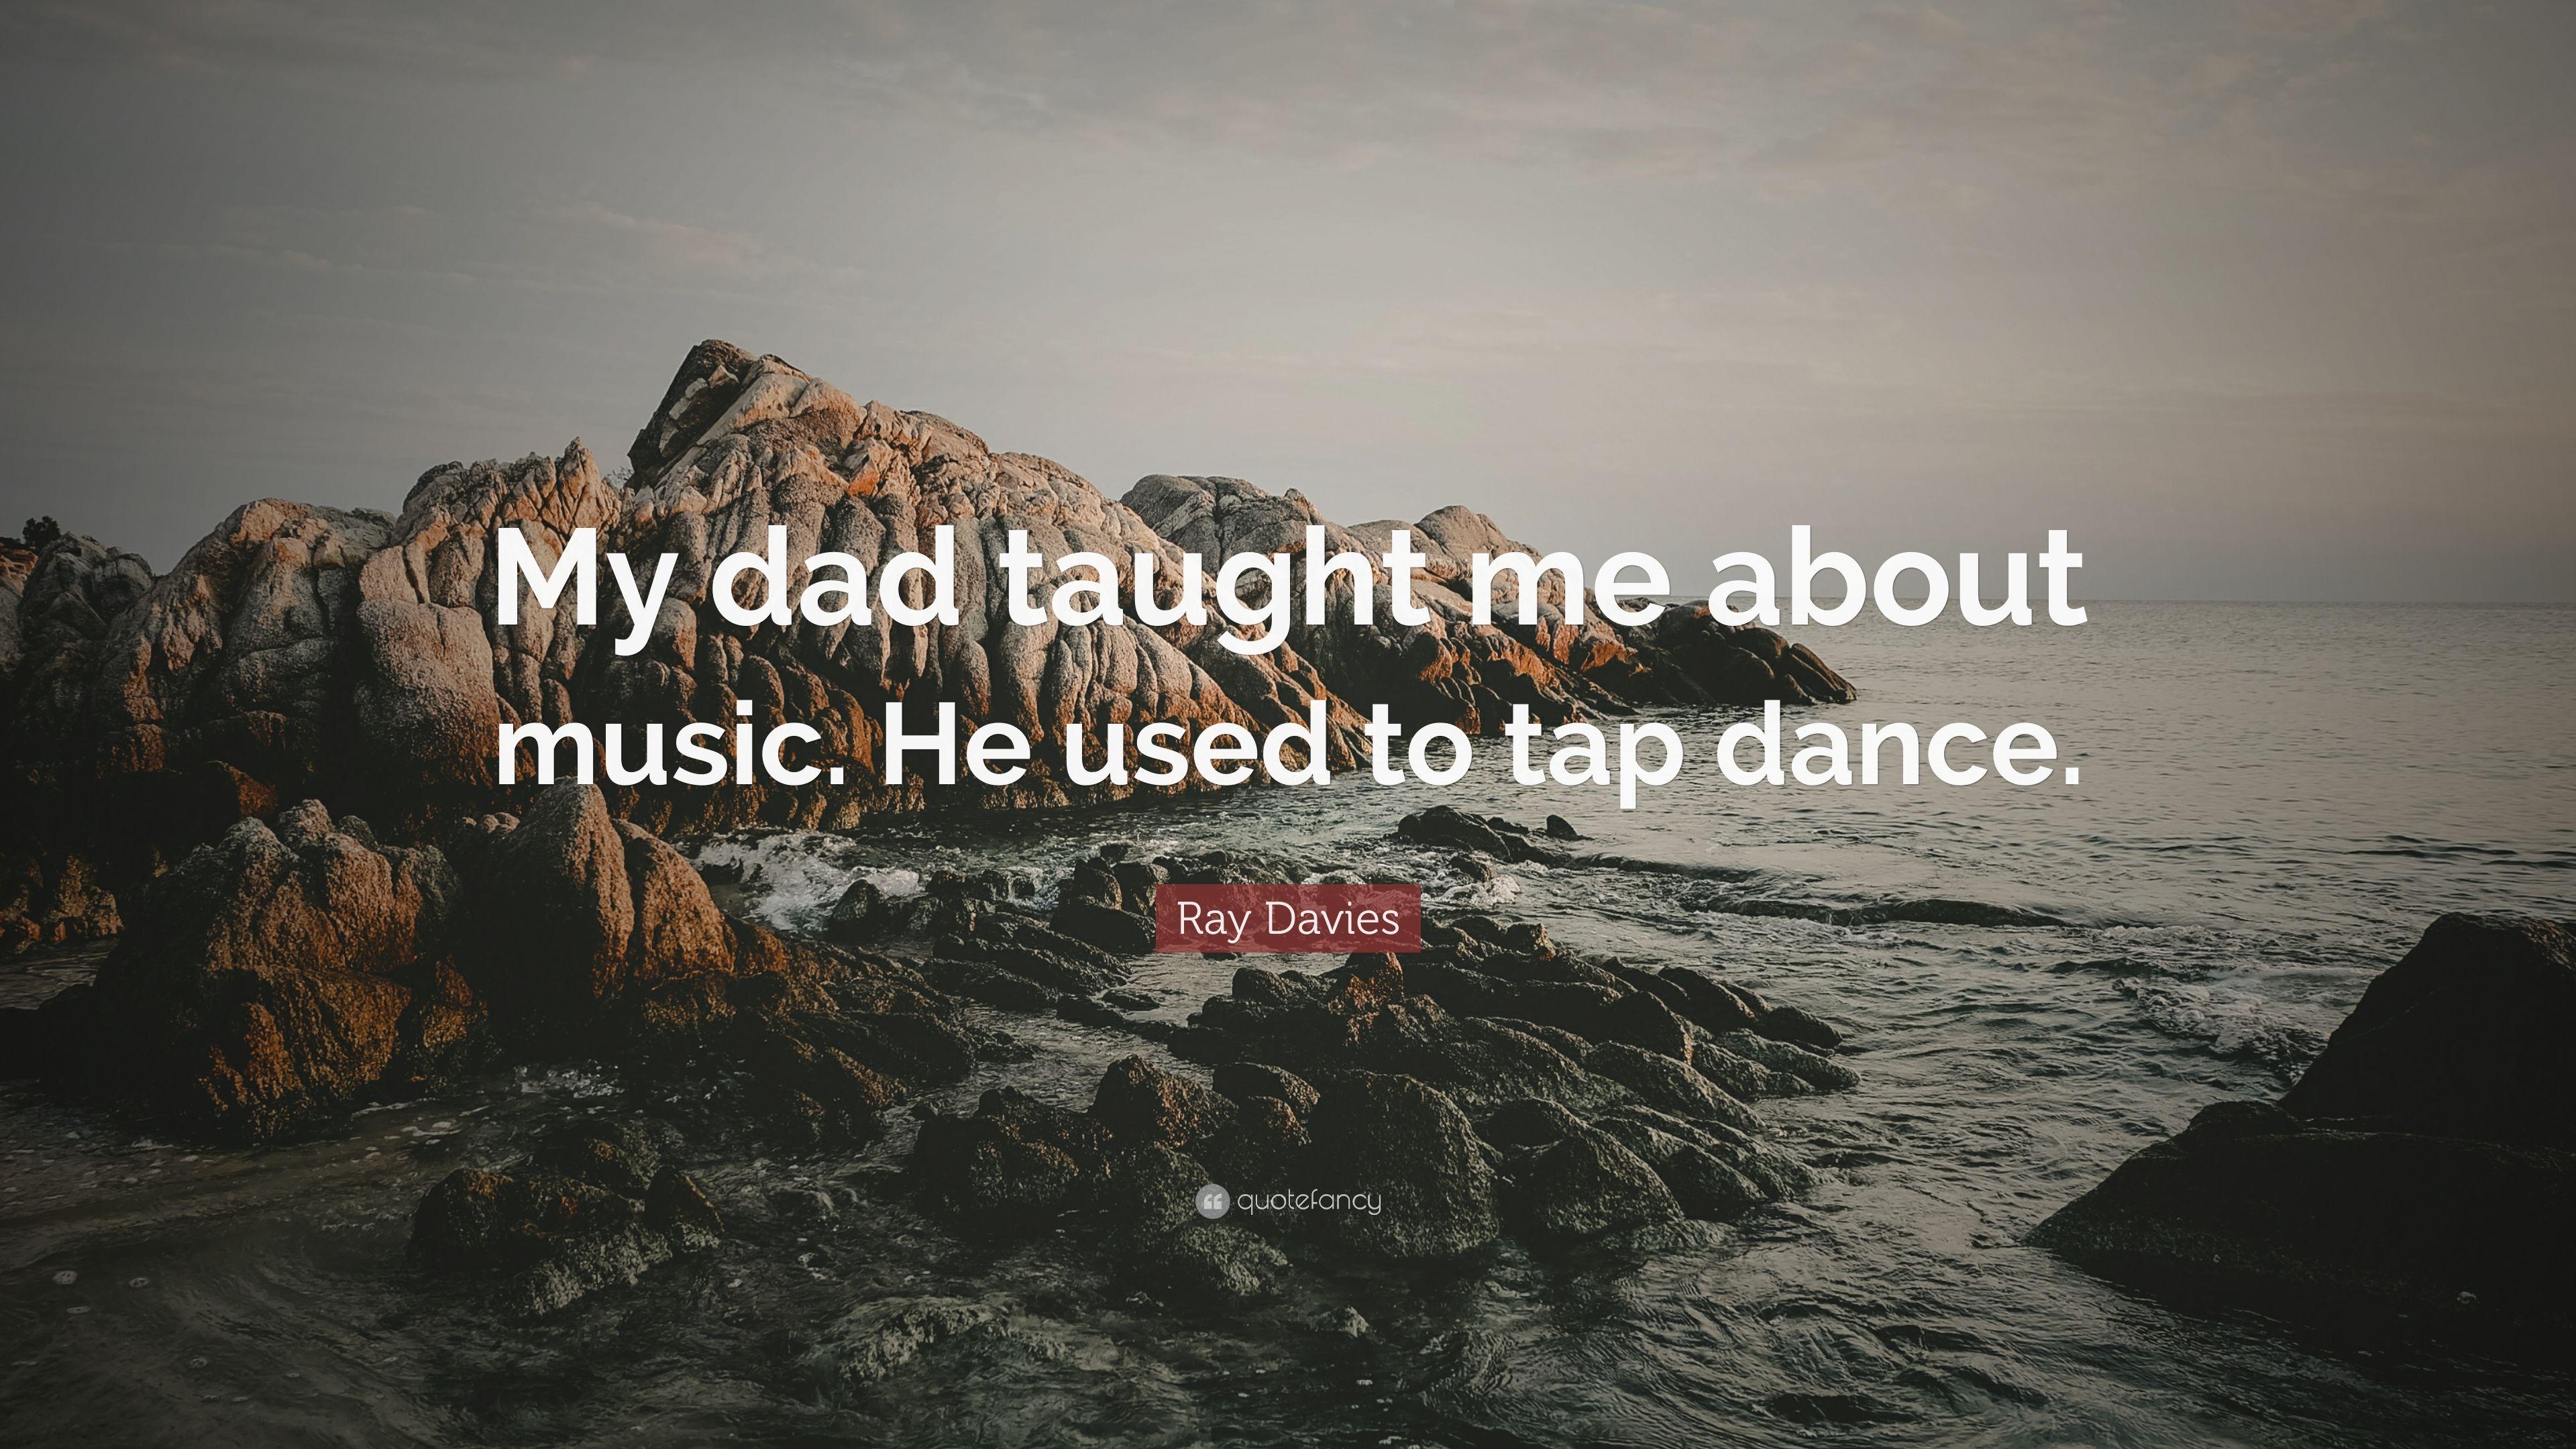 Ray Davies Quote: “My dad taught me about music. He used to tap